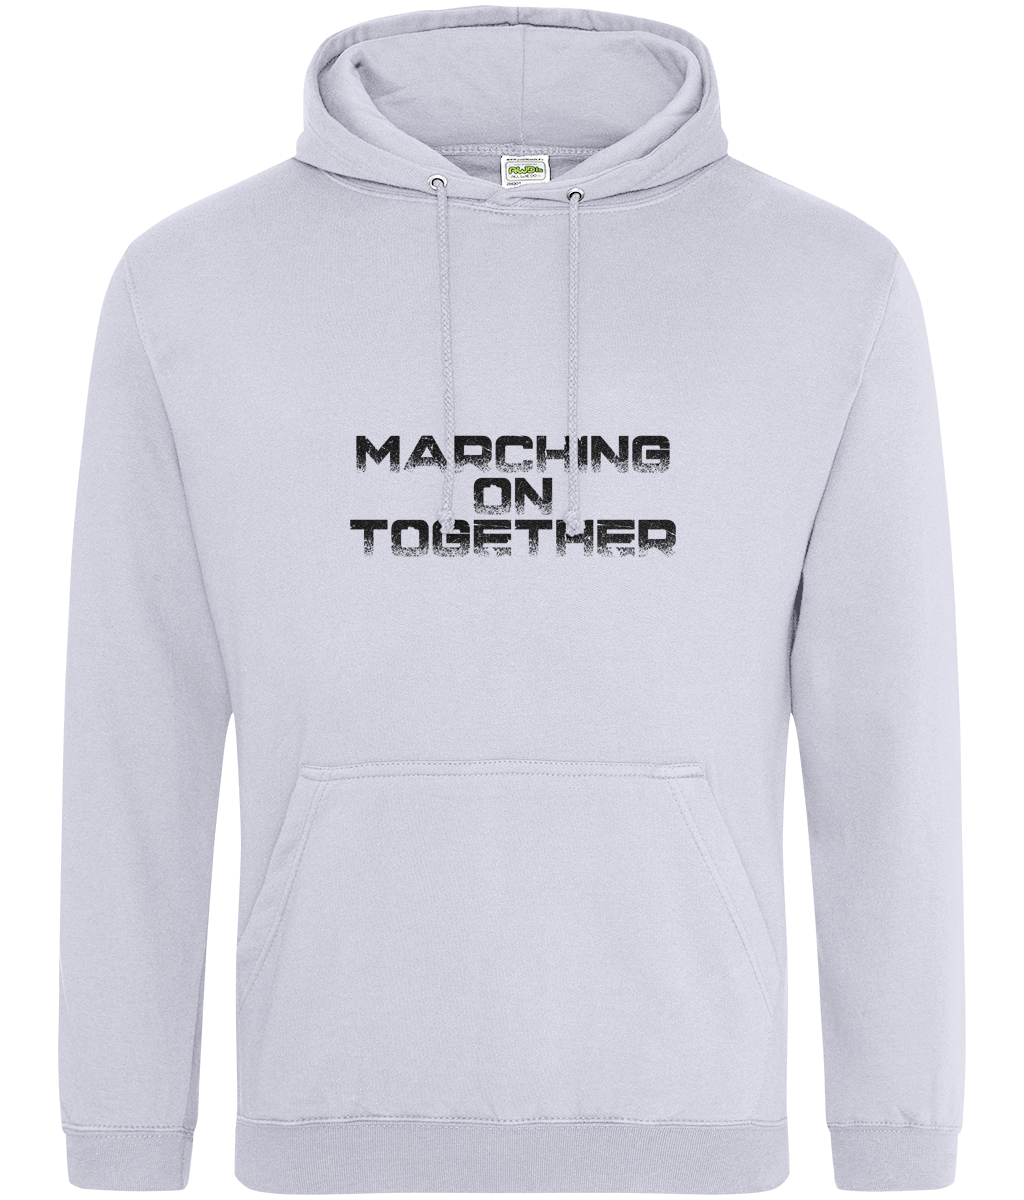 Marching on Together Hoodie Women